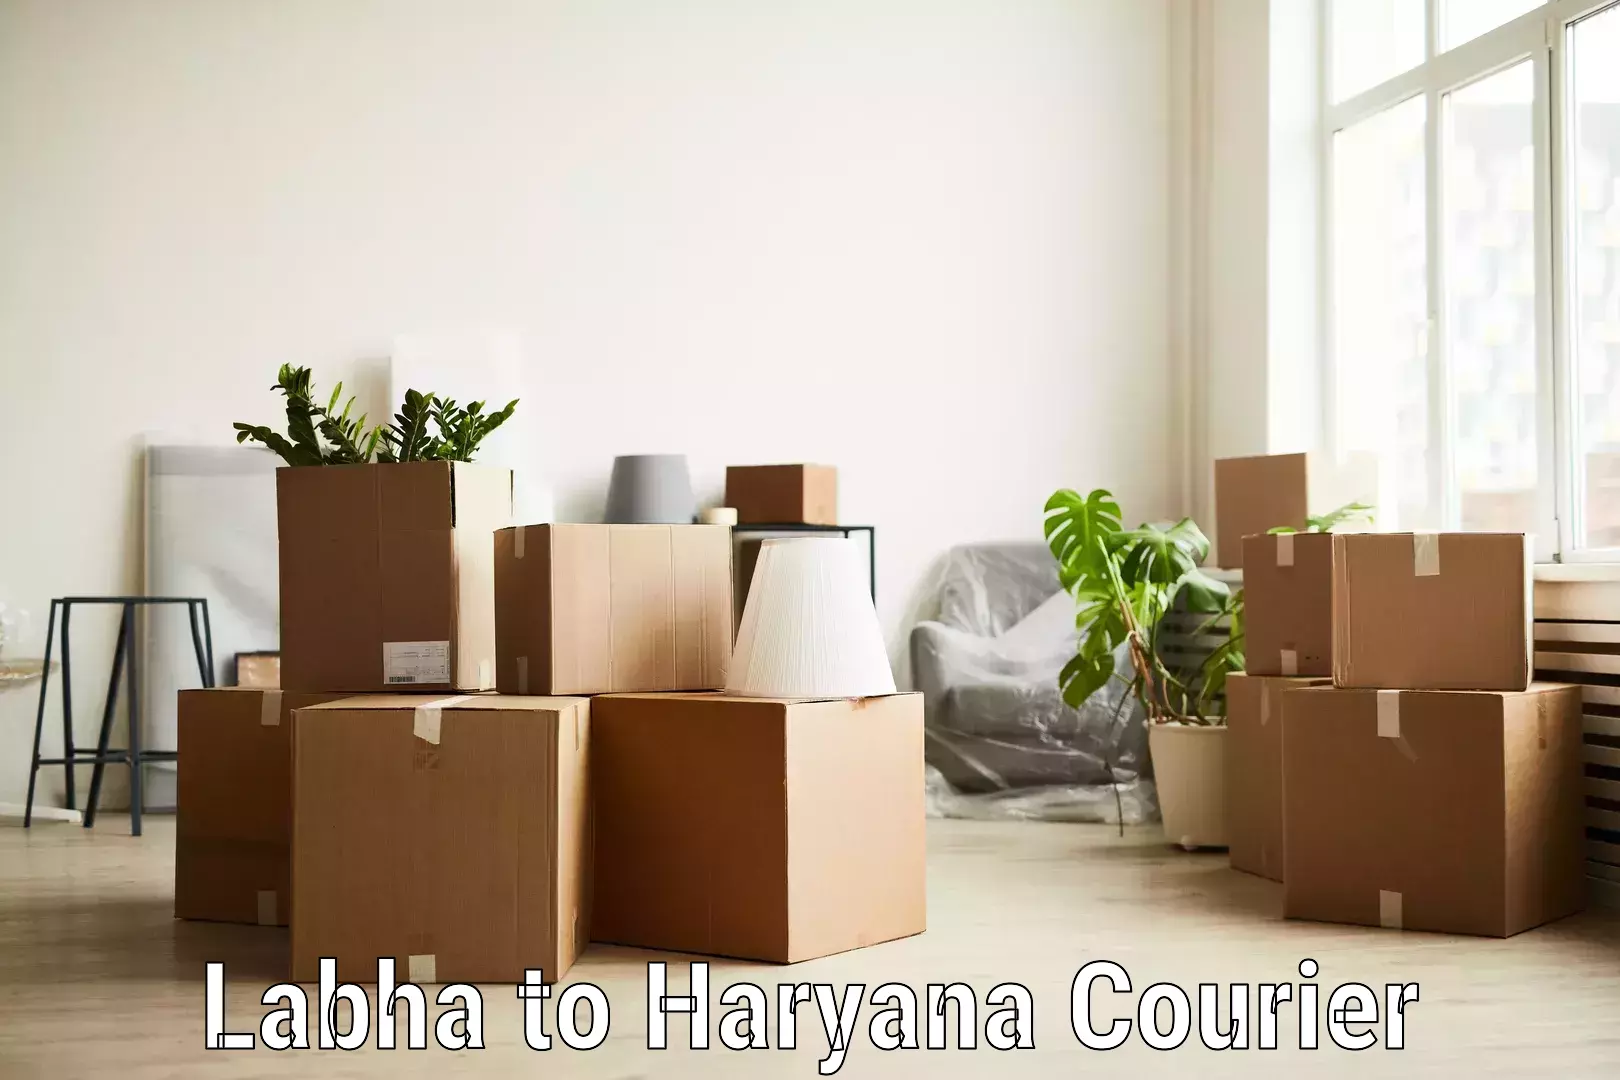 Nationwide courier service in Labha to Haryana